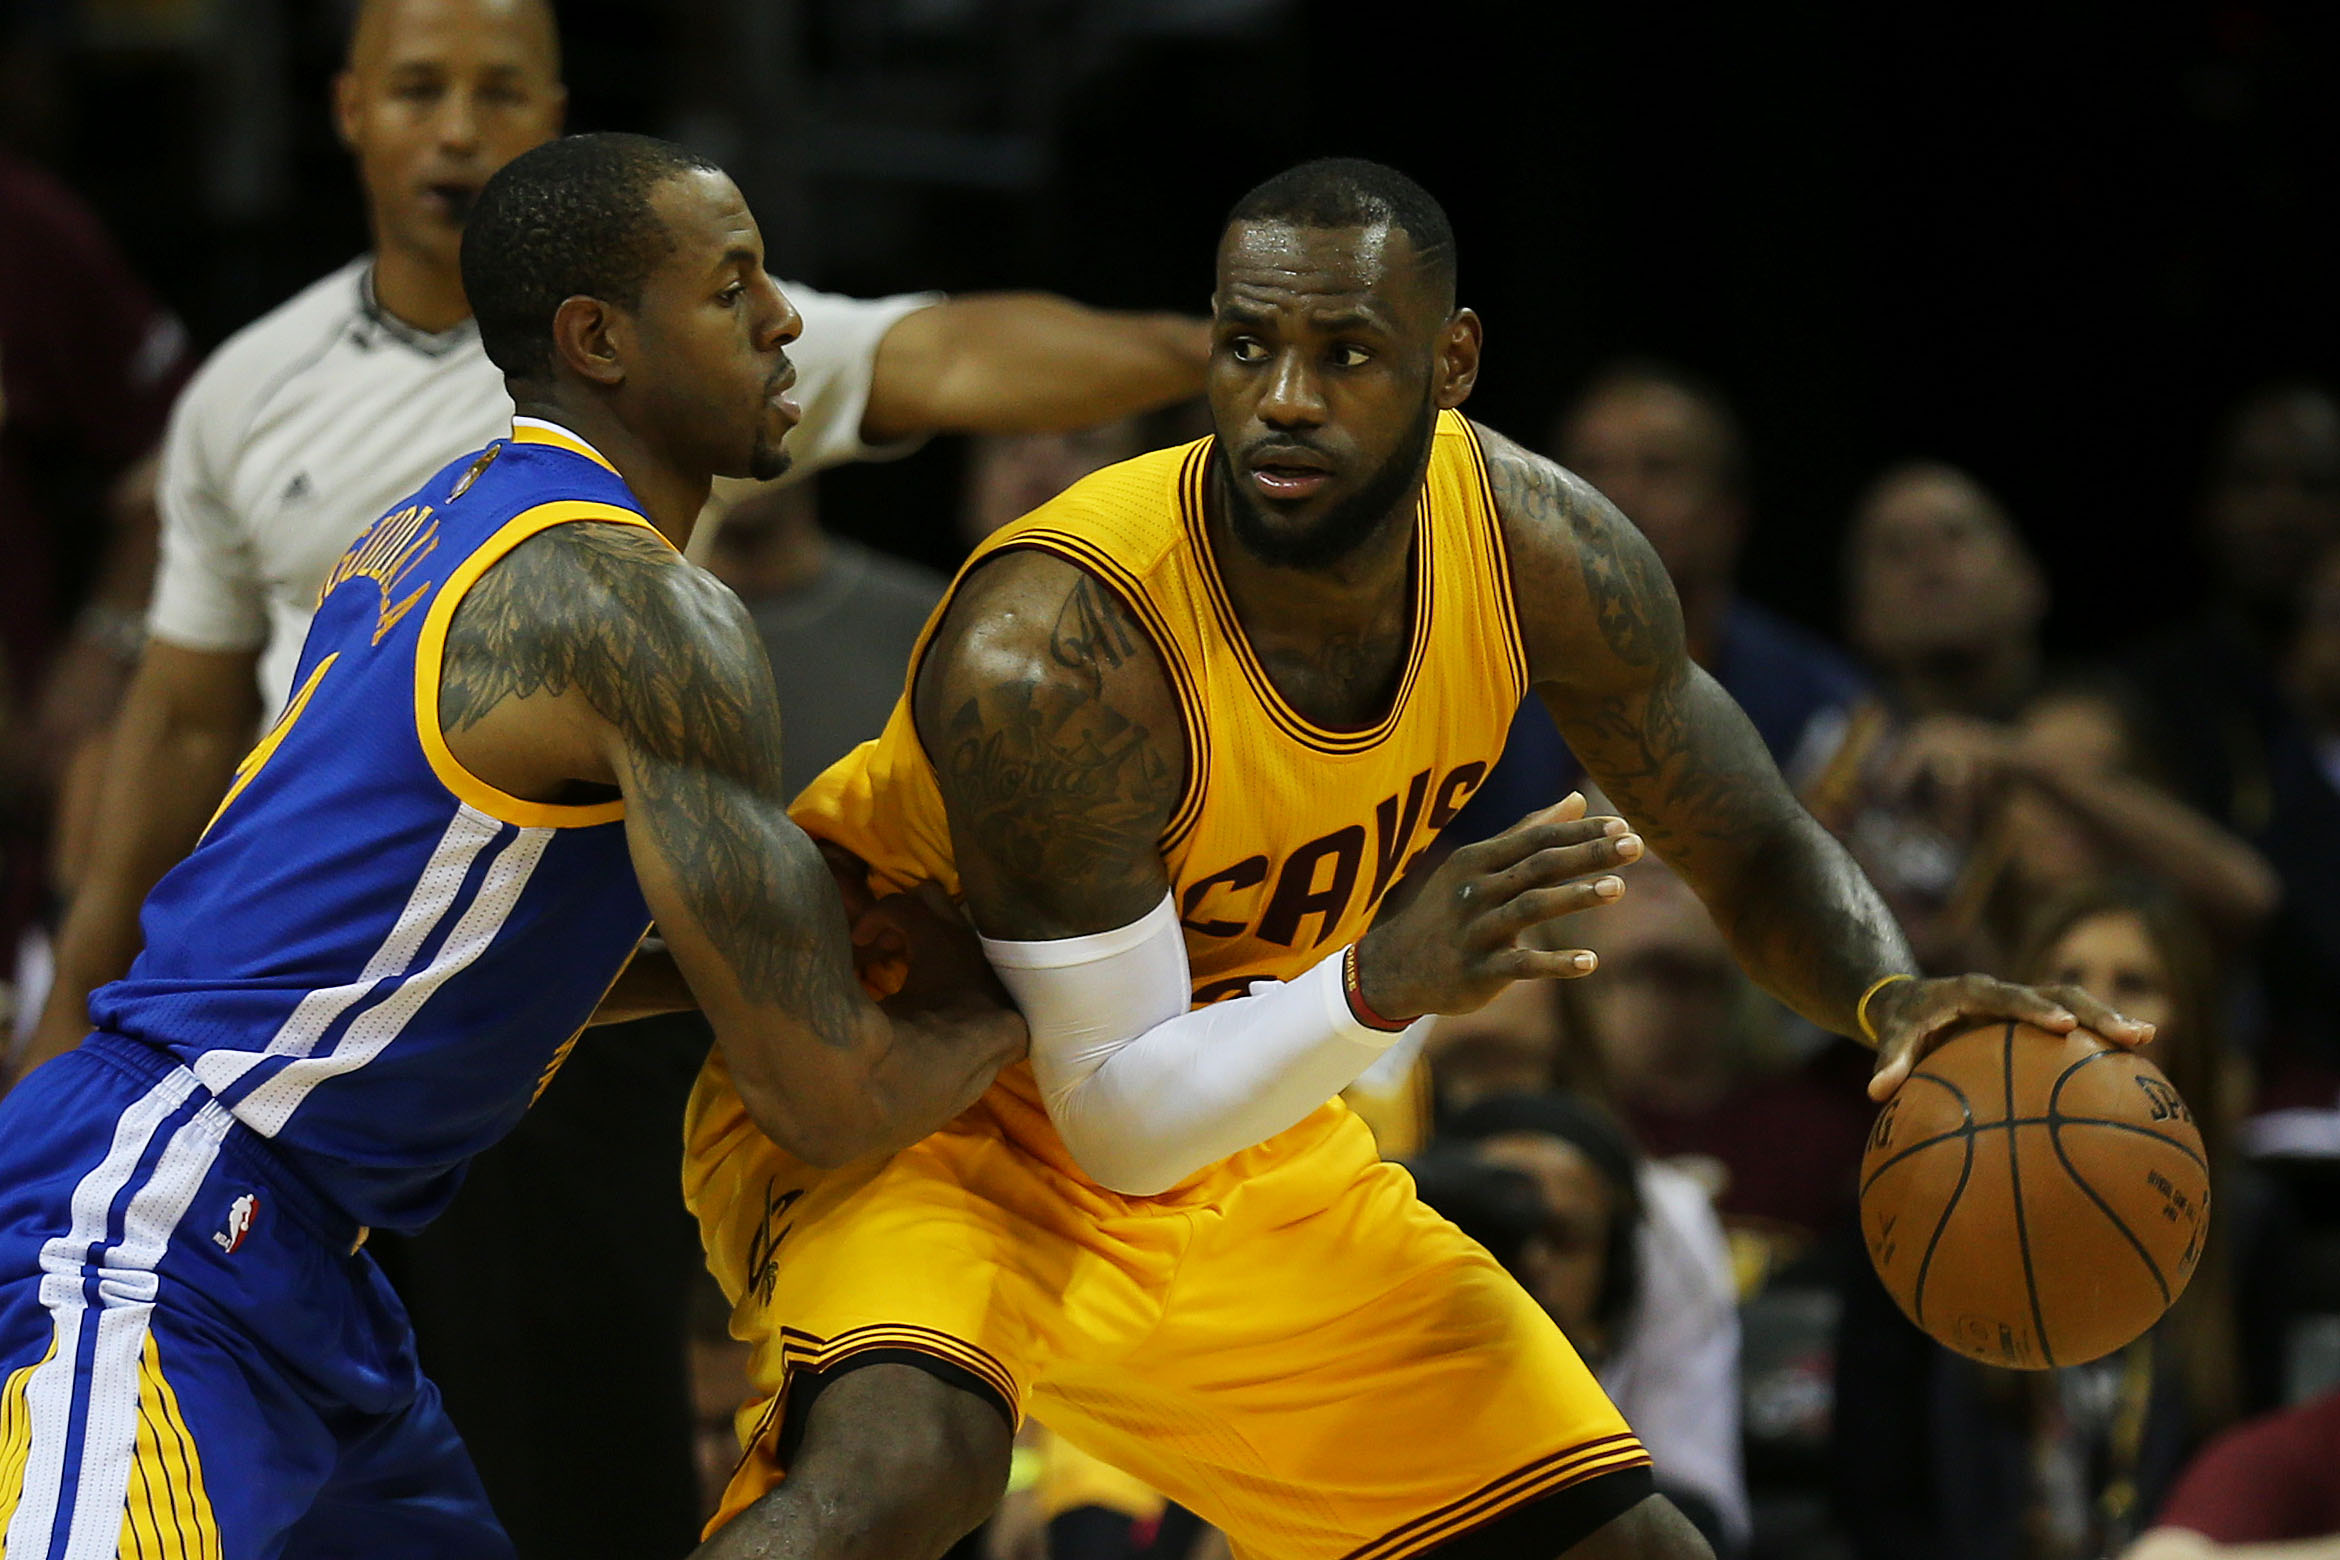 Andre Iguodala will open Game 4 on LeBron James rather than picking him up off the bench. (Mike Ehrmann/Getty Images)